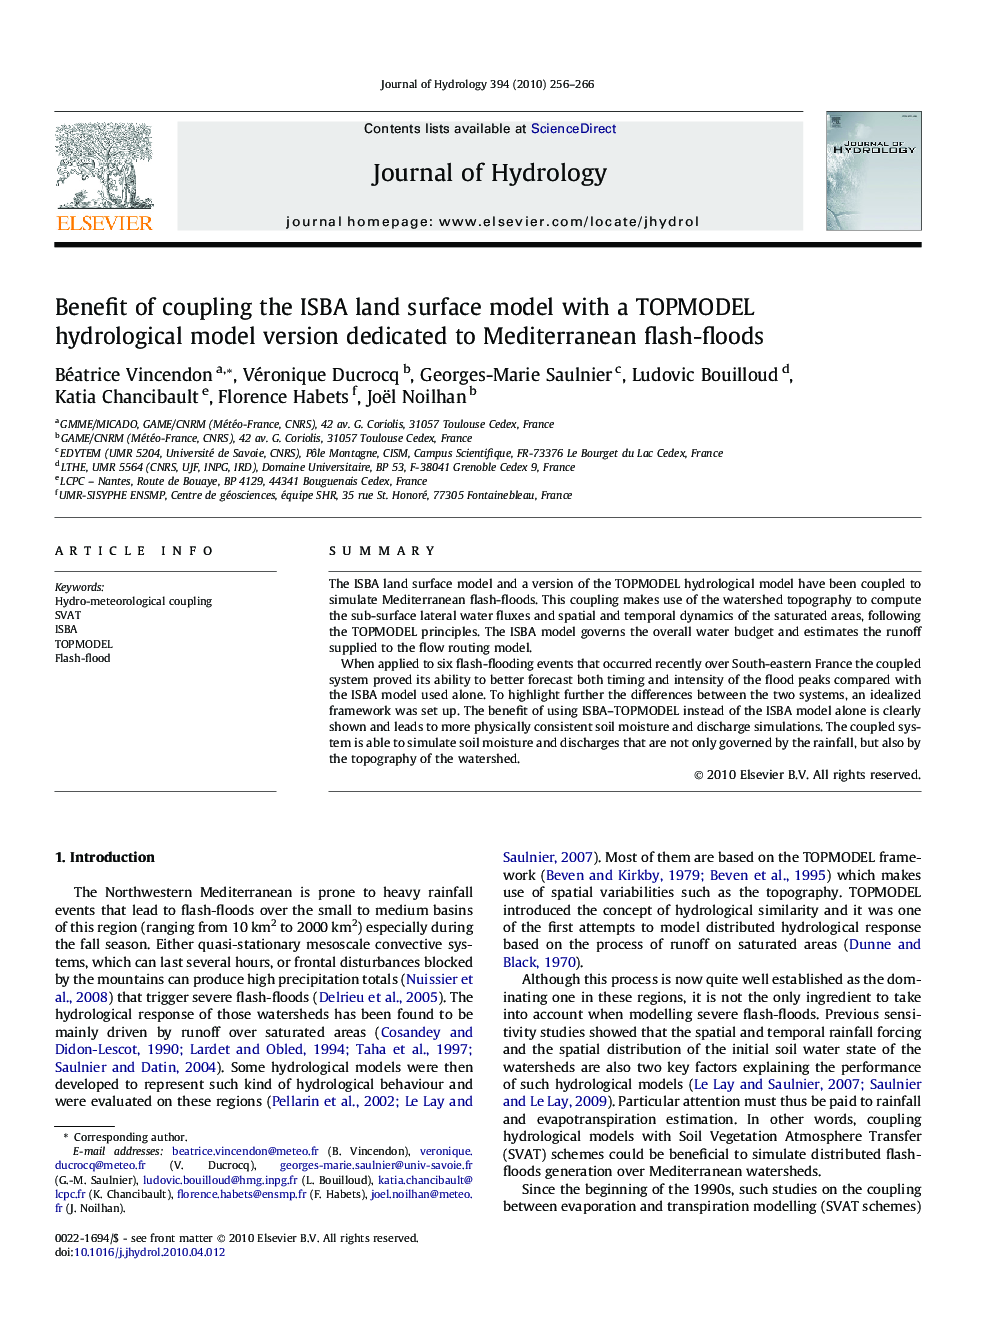 Benefit of coupling the ISBA land surface model with a TOPMODEL hydrological model version dedicated to Mediterranean flash-floods